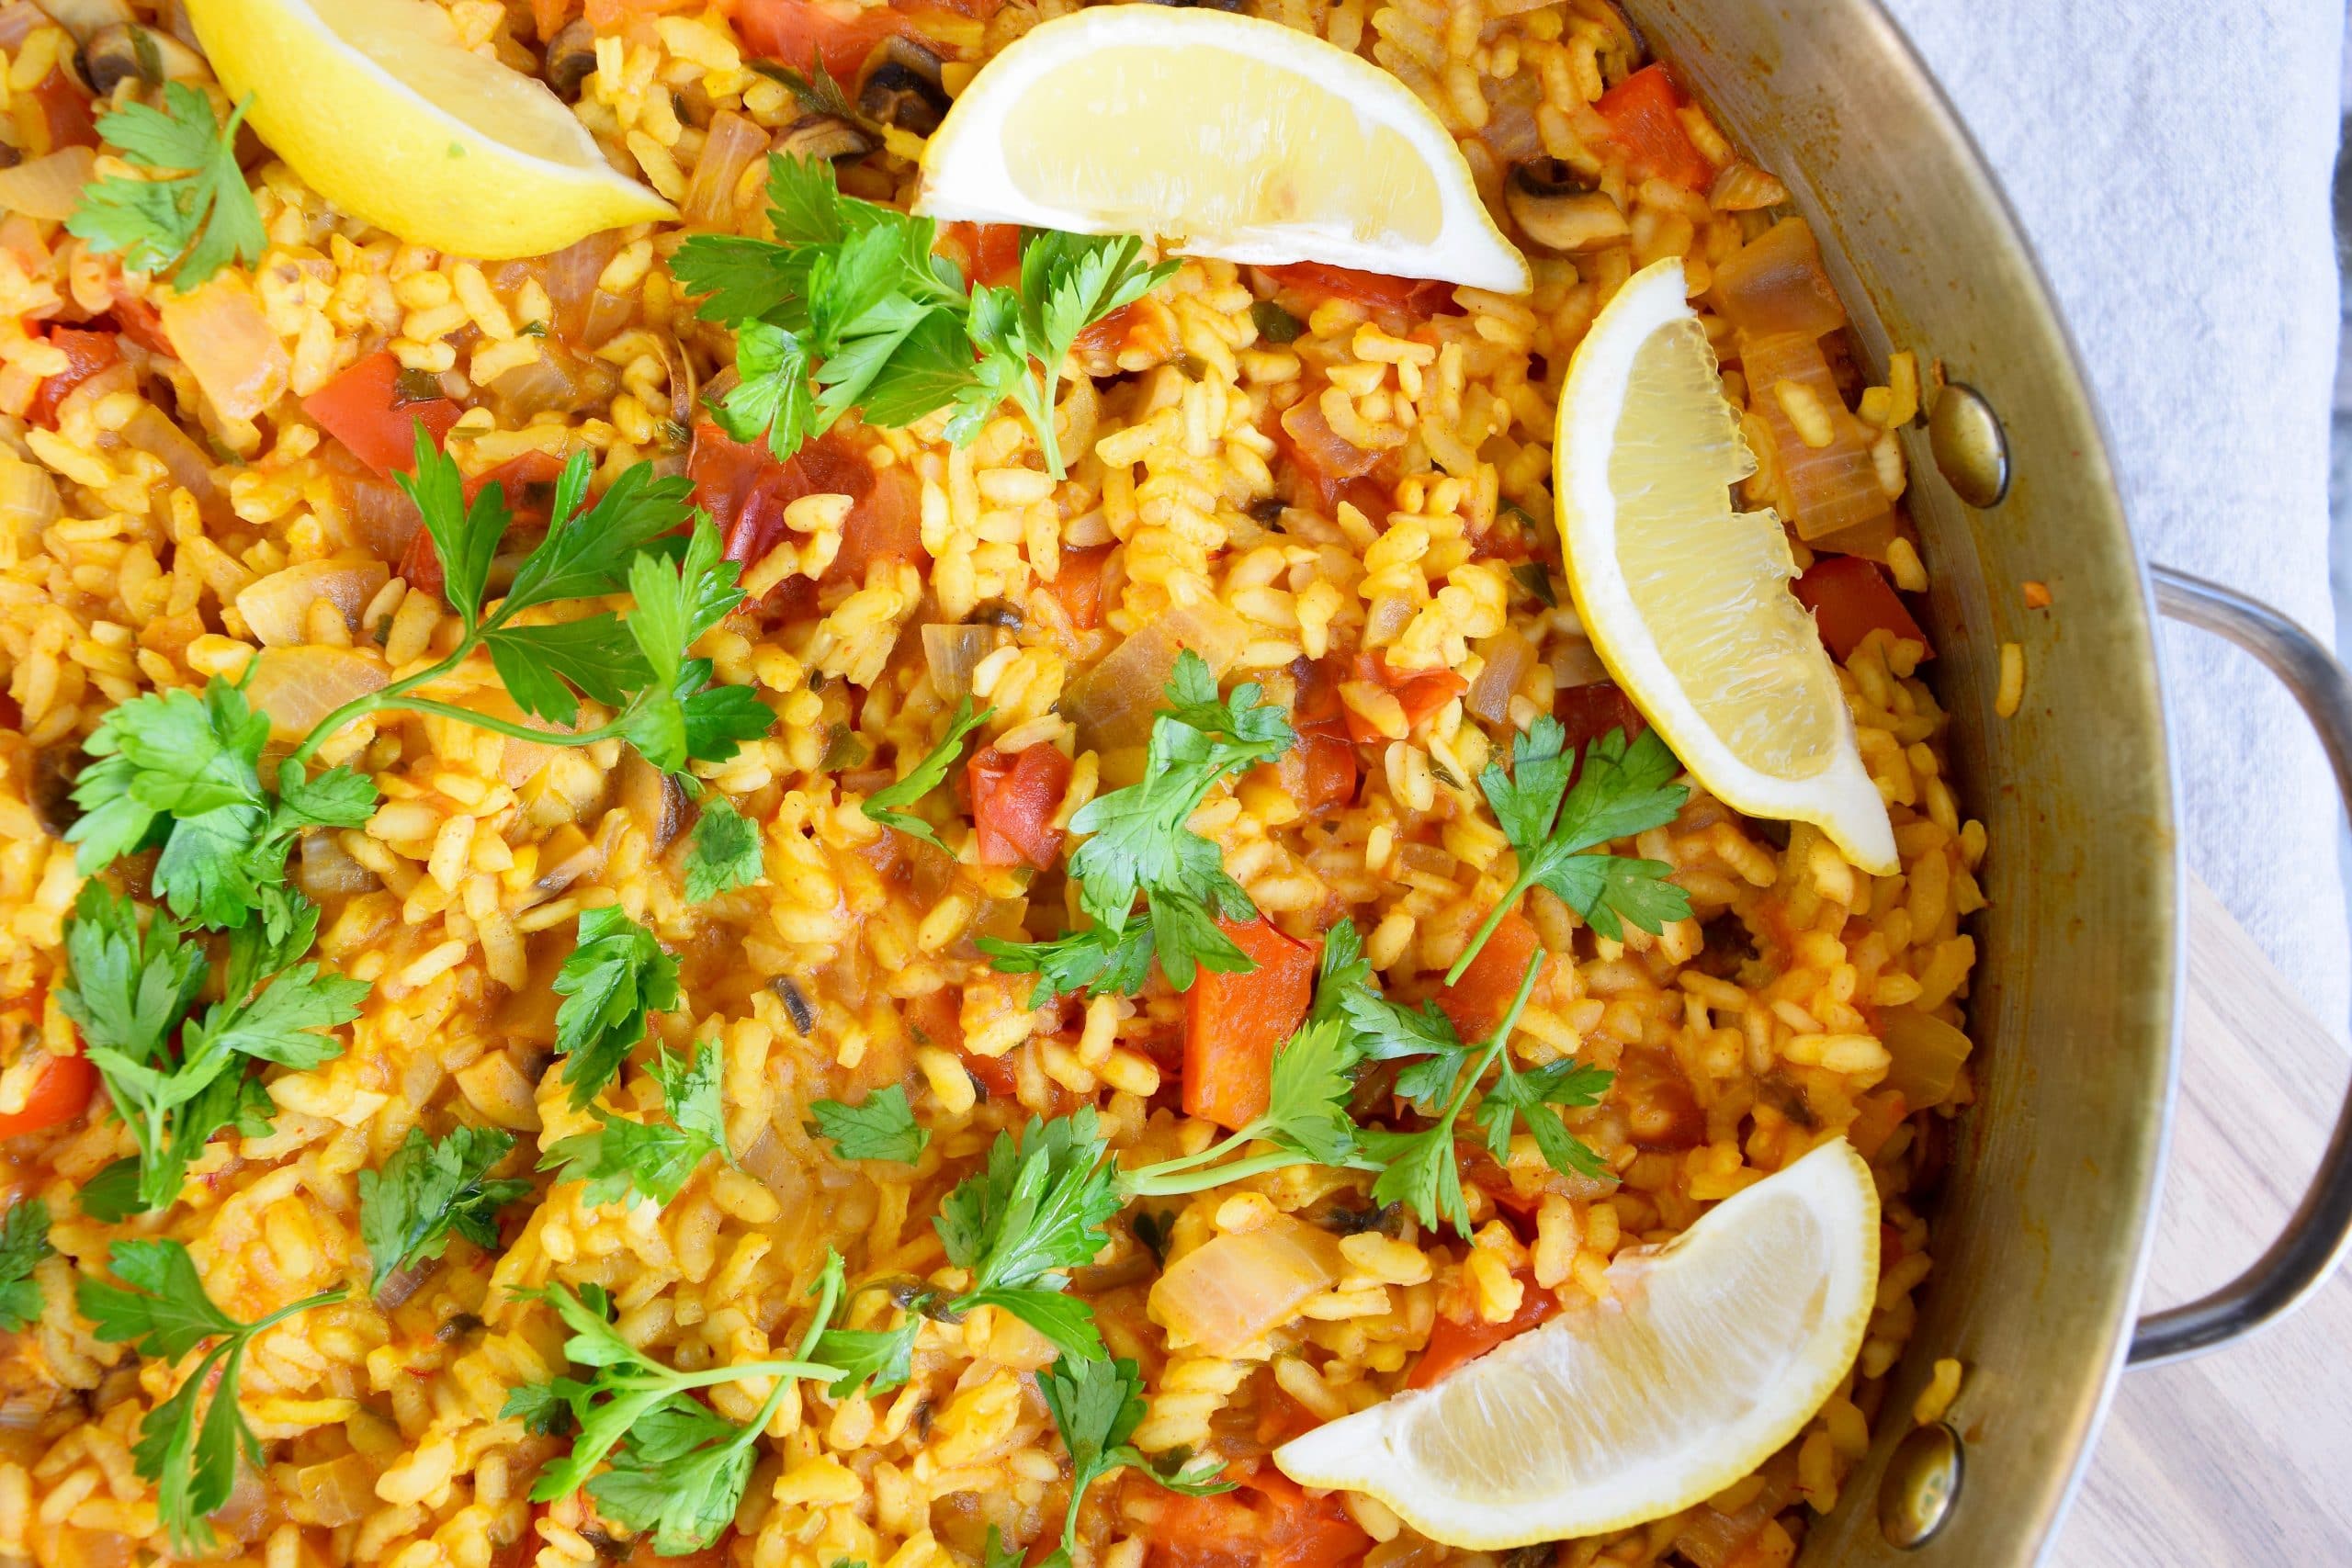 What ingredients go in a traditional paella?